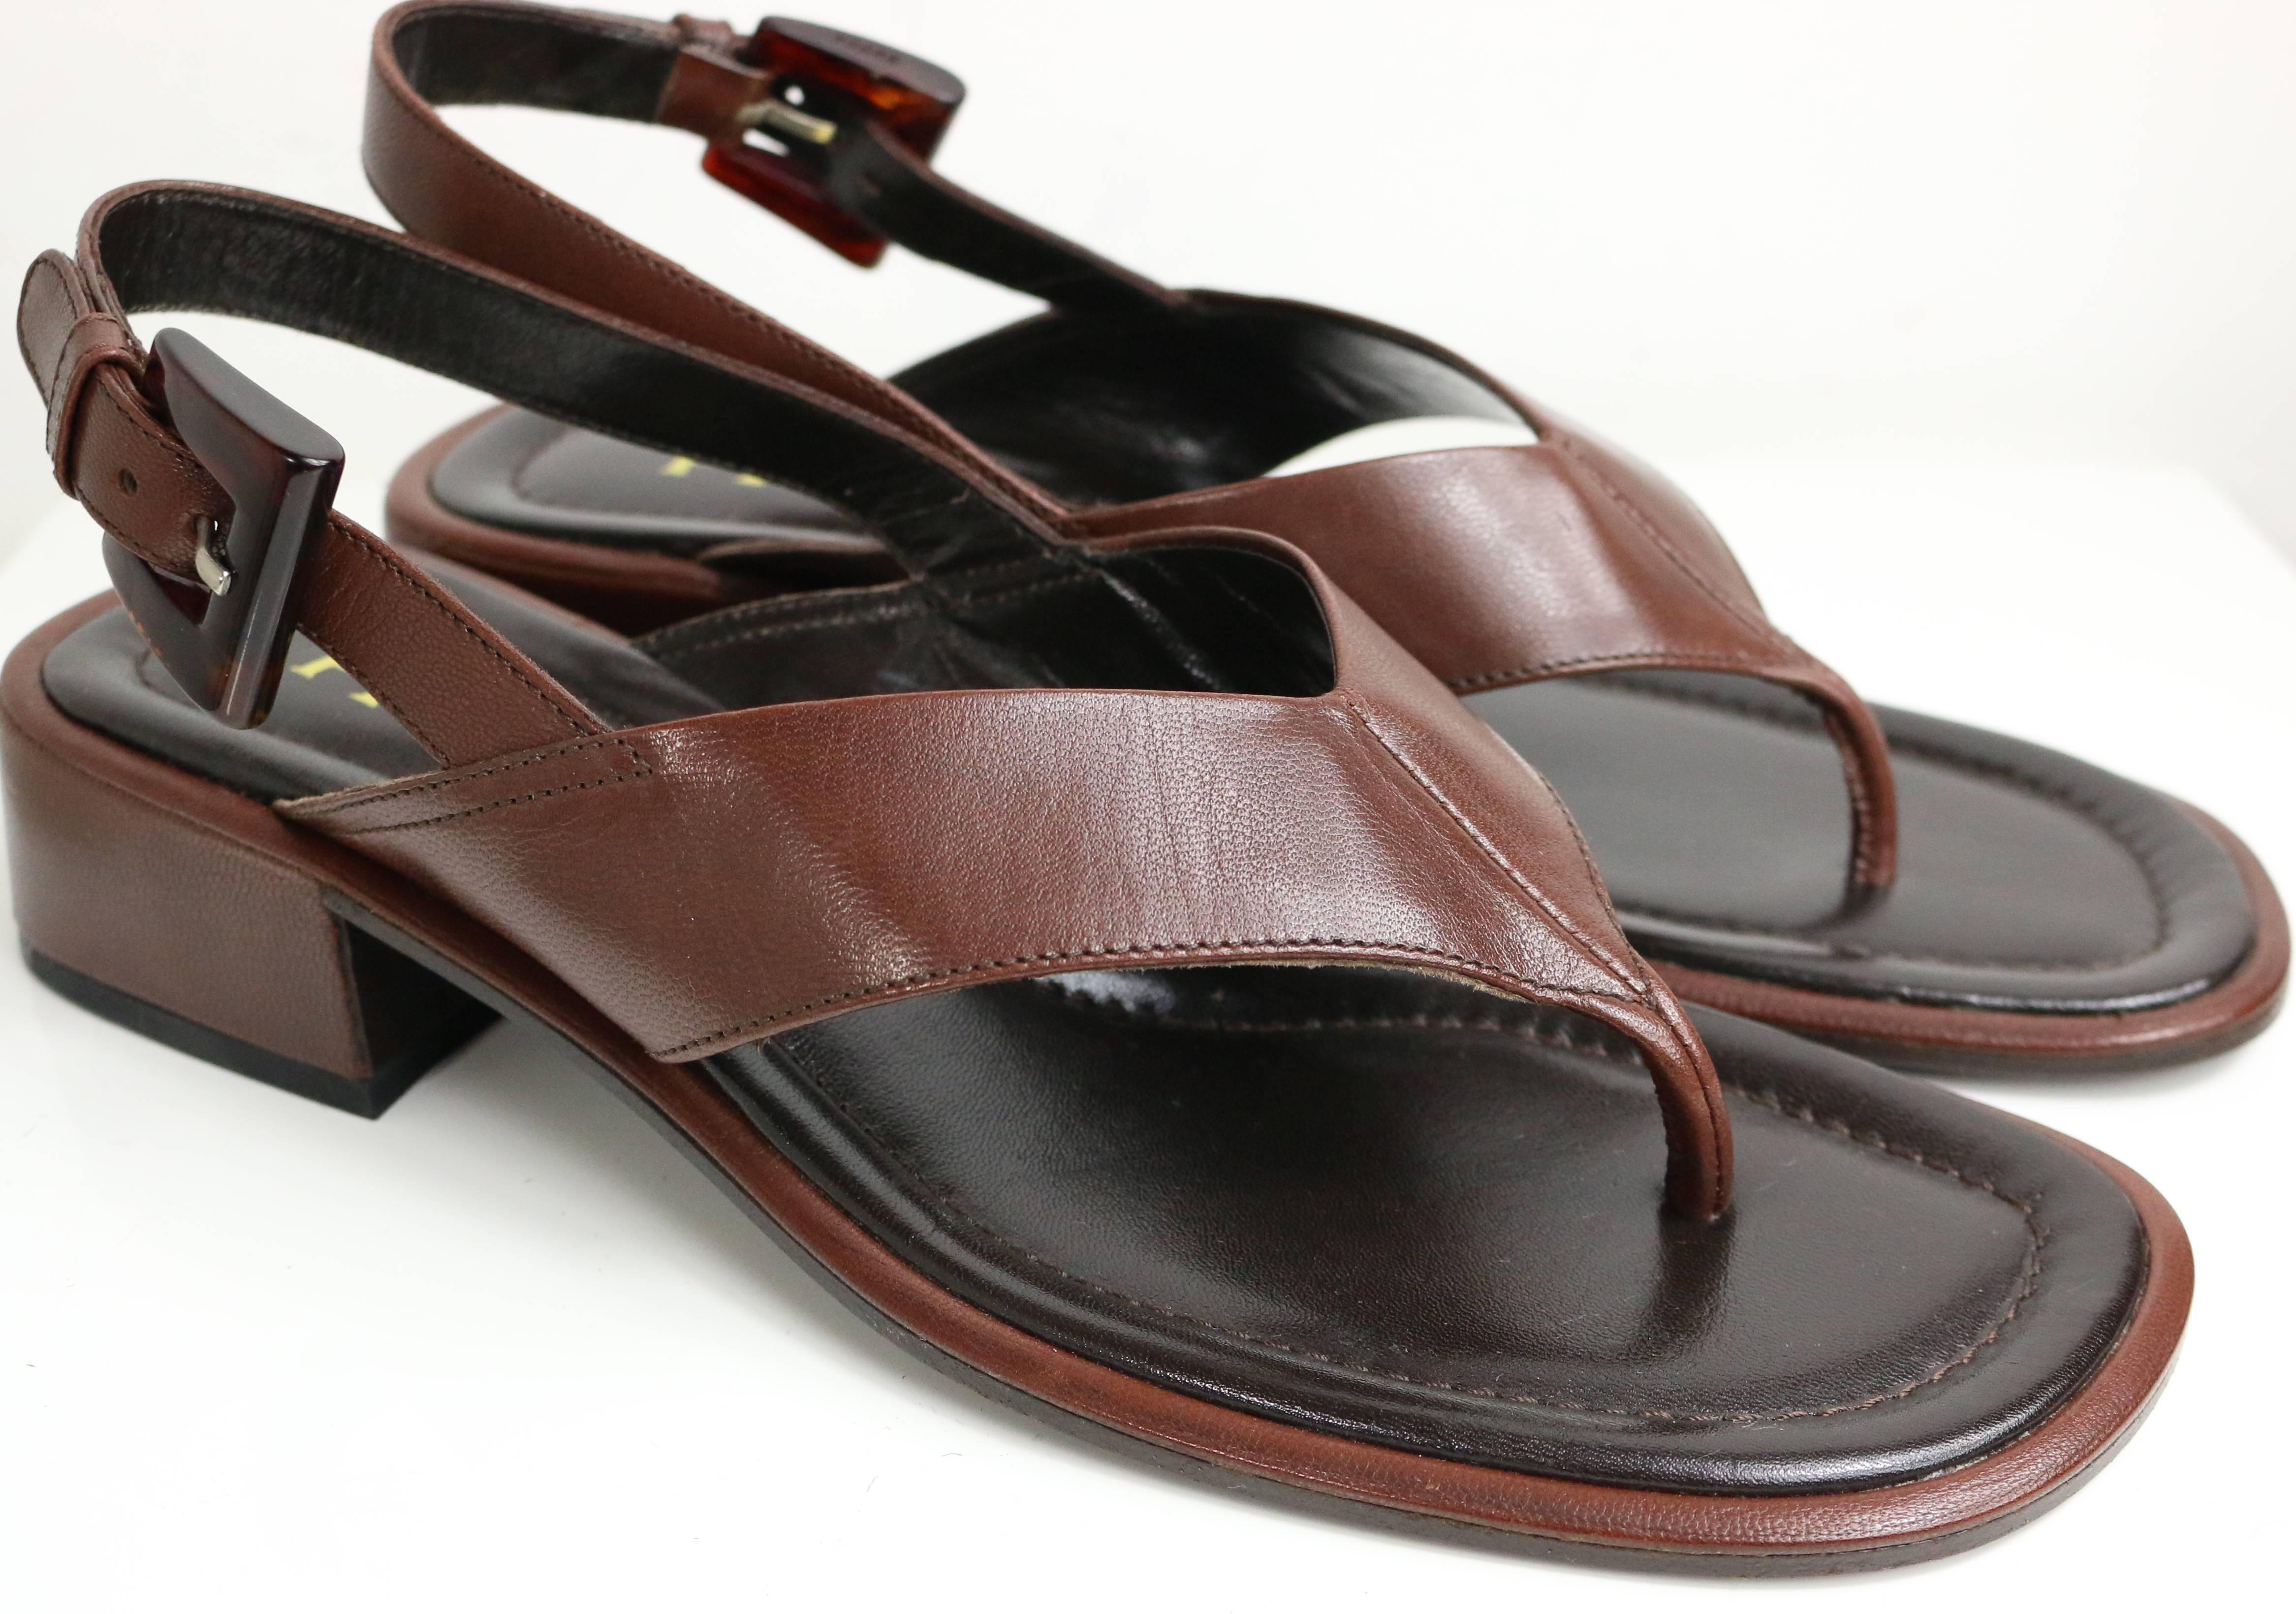 - Vintage 90s Prada brown leather slingback sandals. 

- Size 37.5. 

- Made in Italy. 
